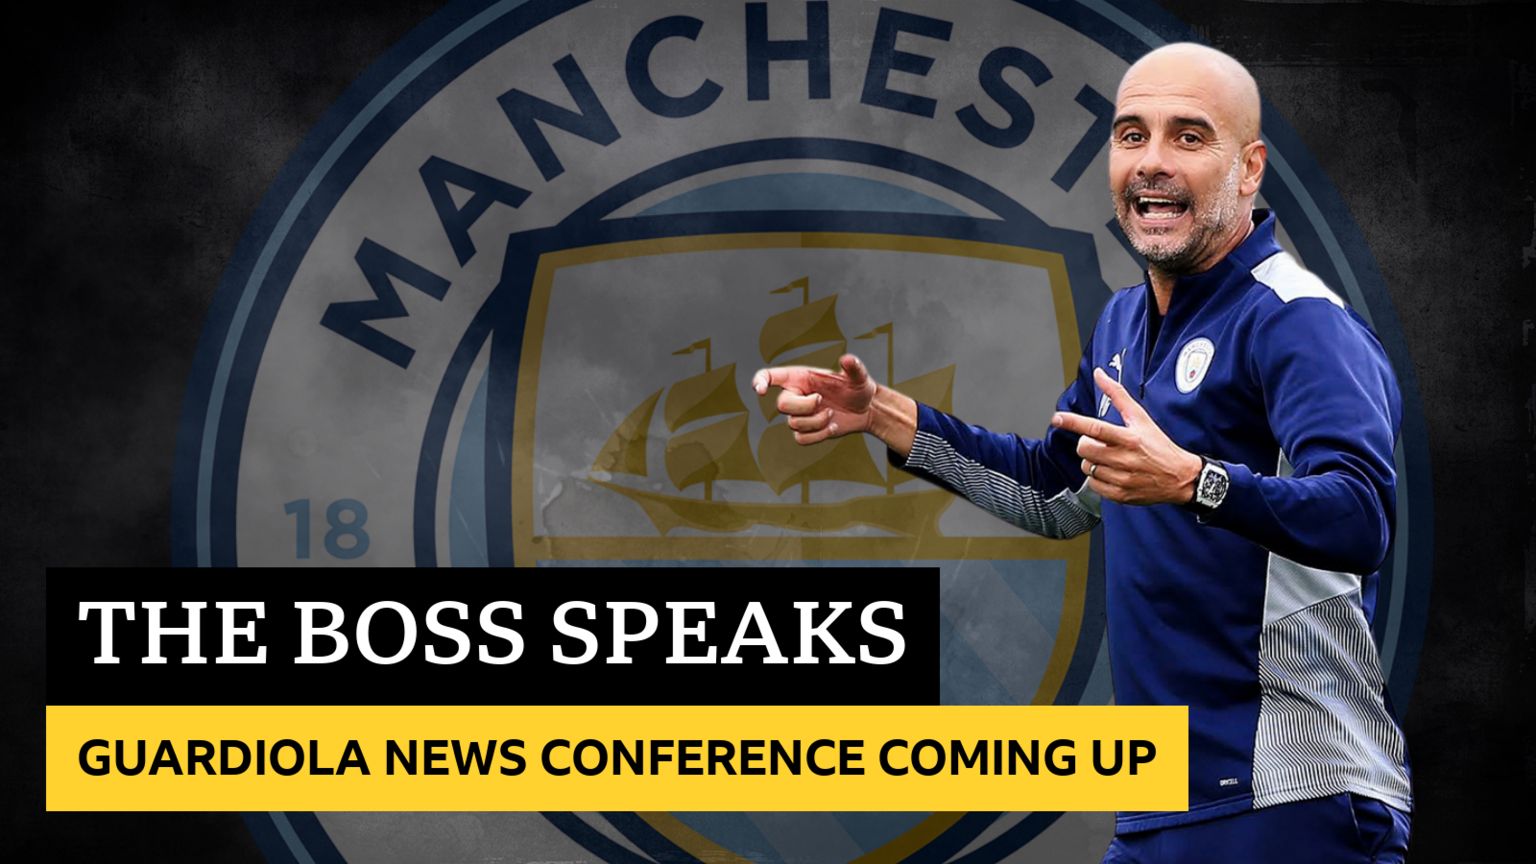 Pep Guardiola news conference coming up